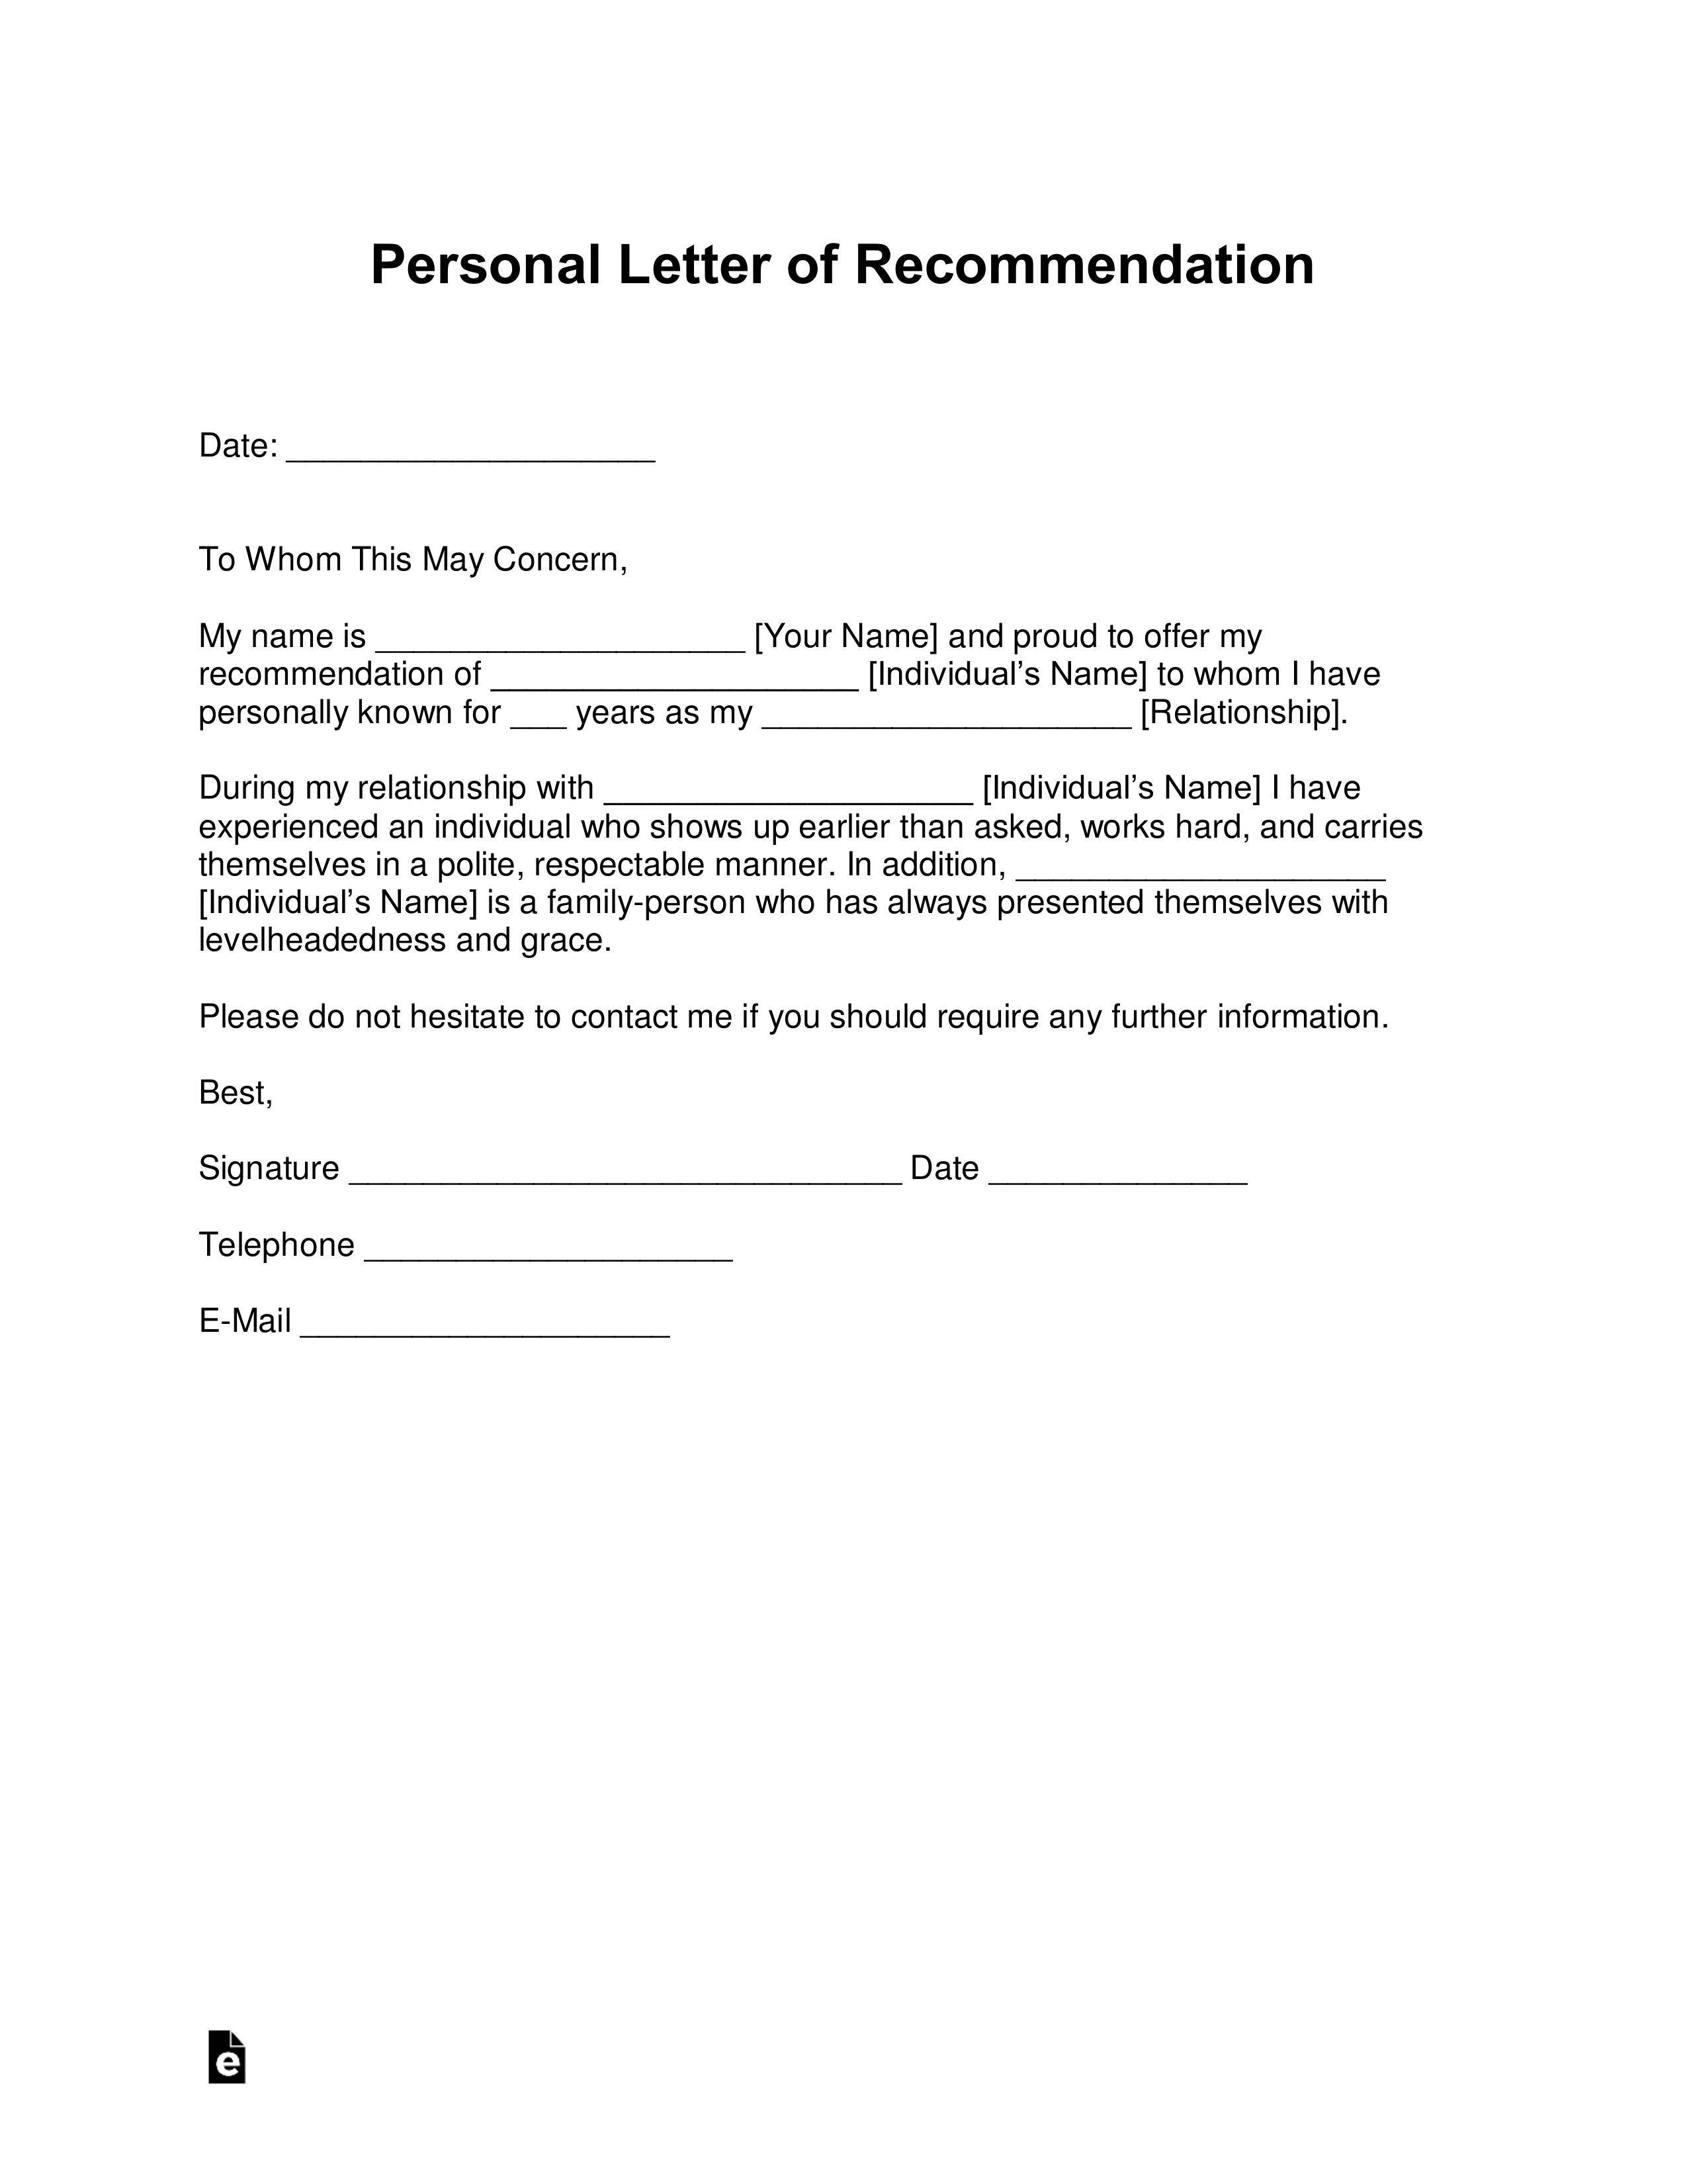 Personal Letter Of Reference Format from eforms.com